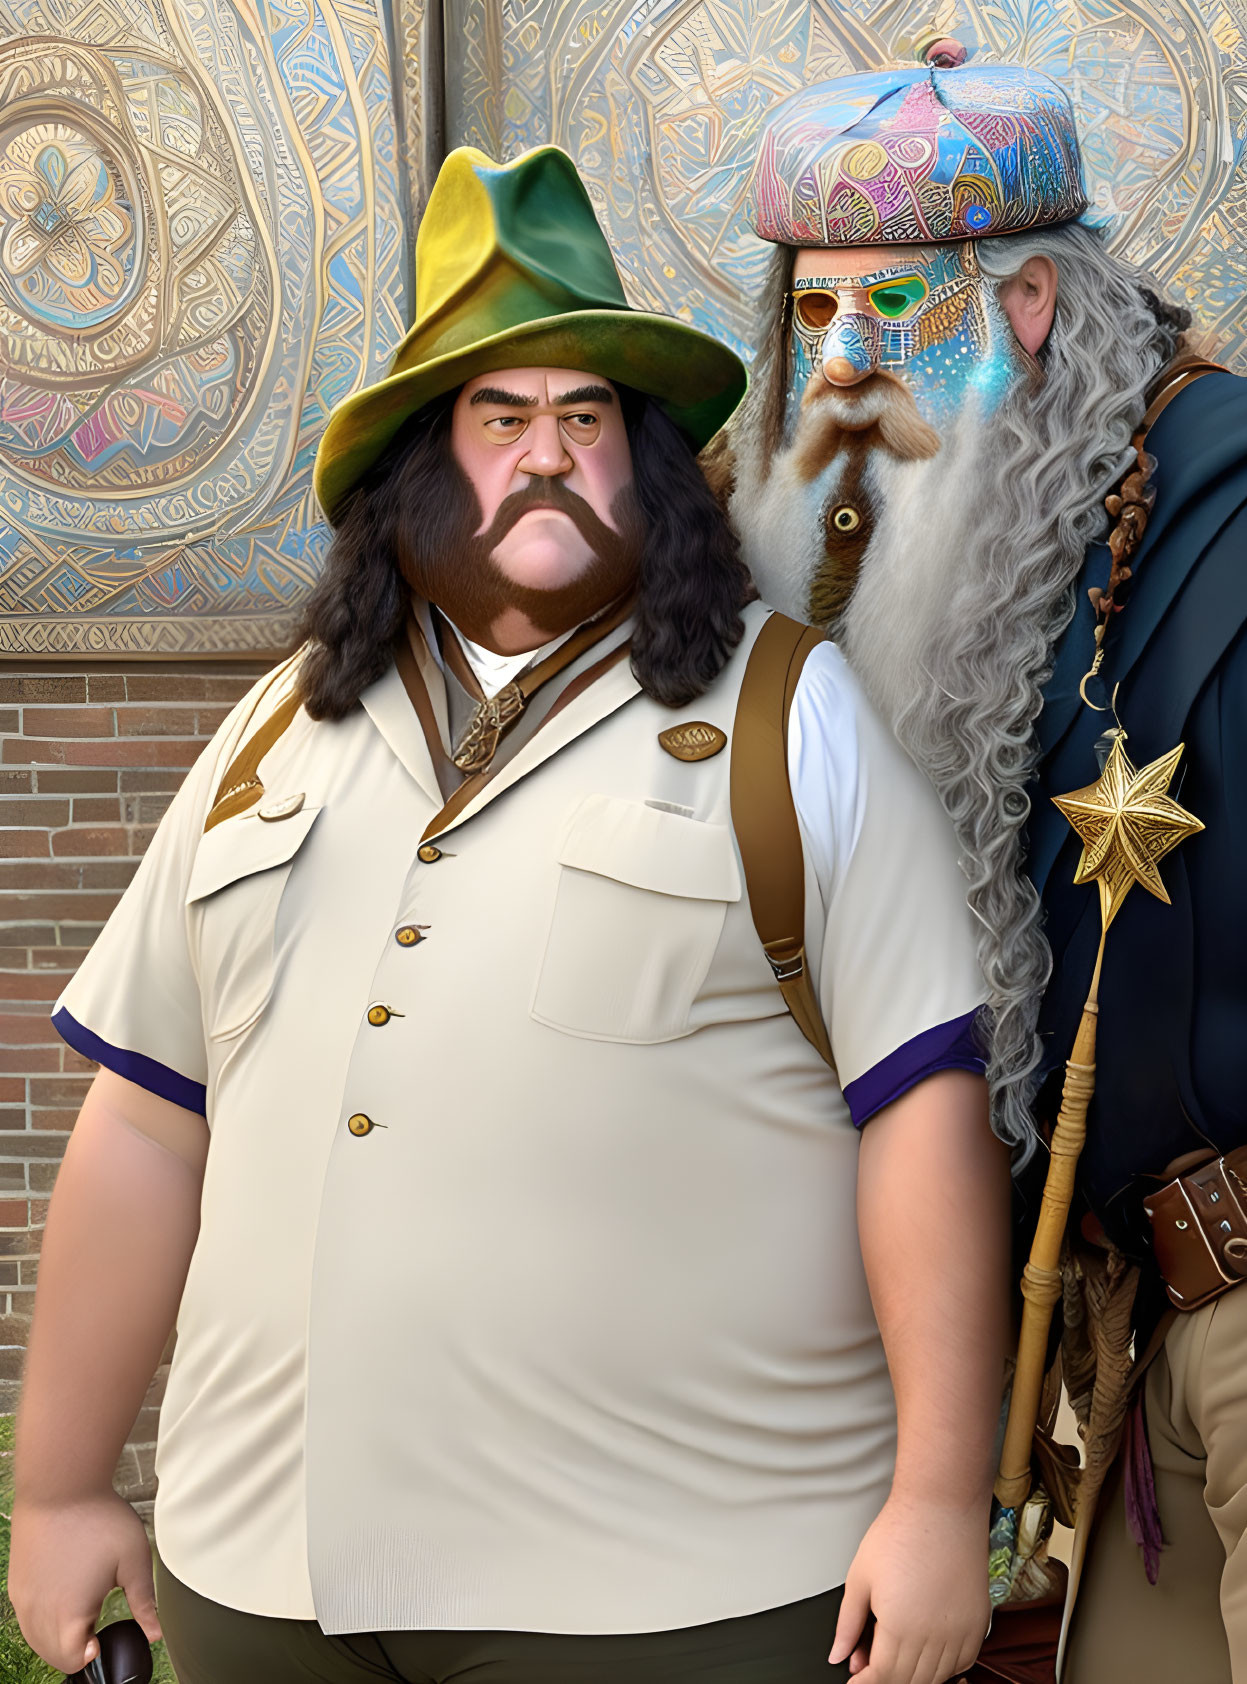 Animated male characters with green hat and badge next to character with long white beard and star-shaped badge.